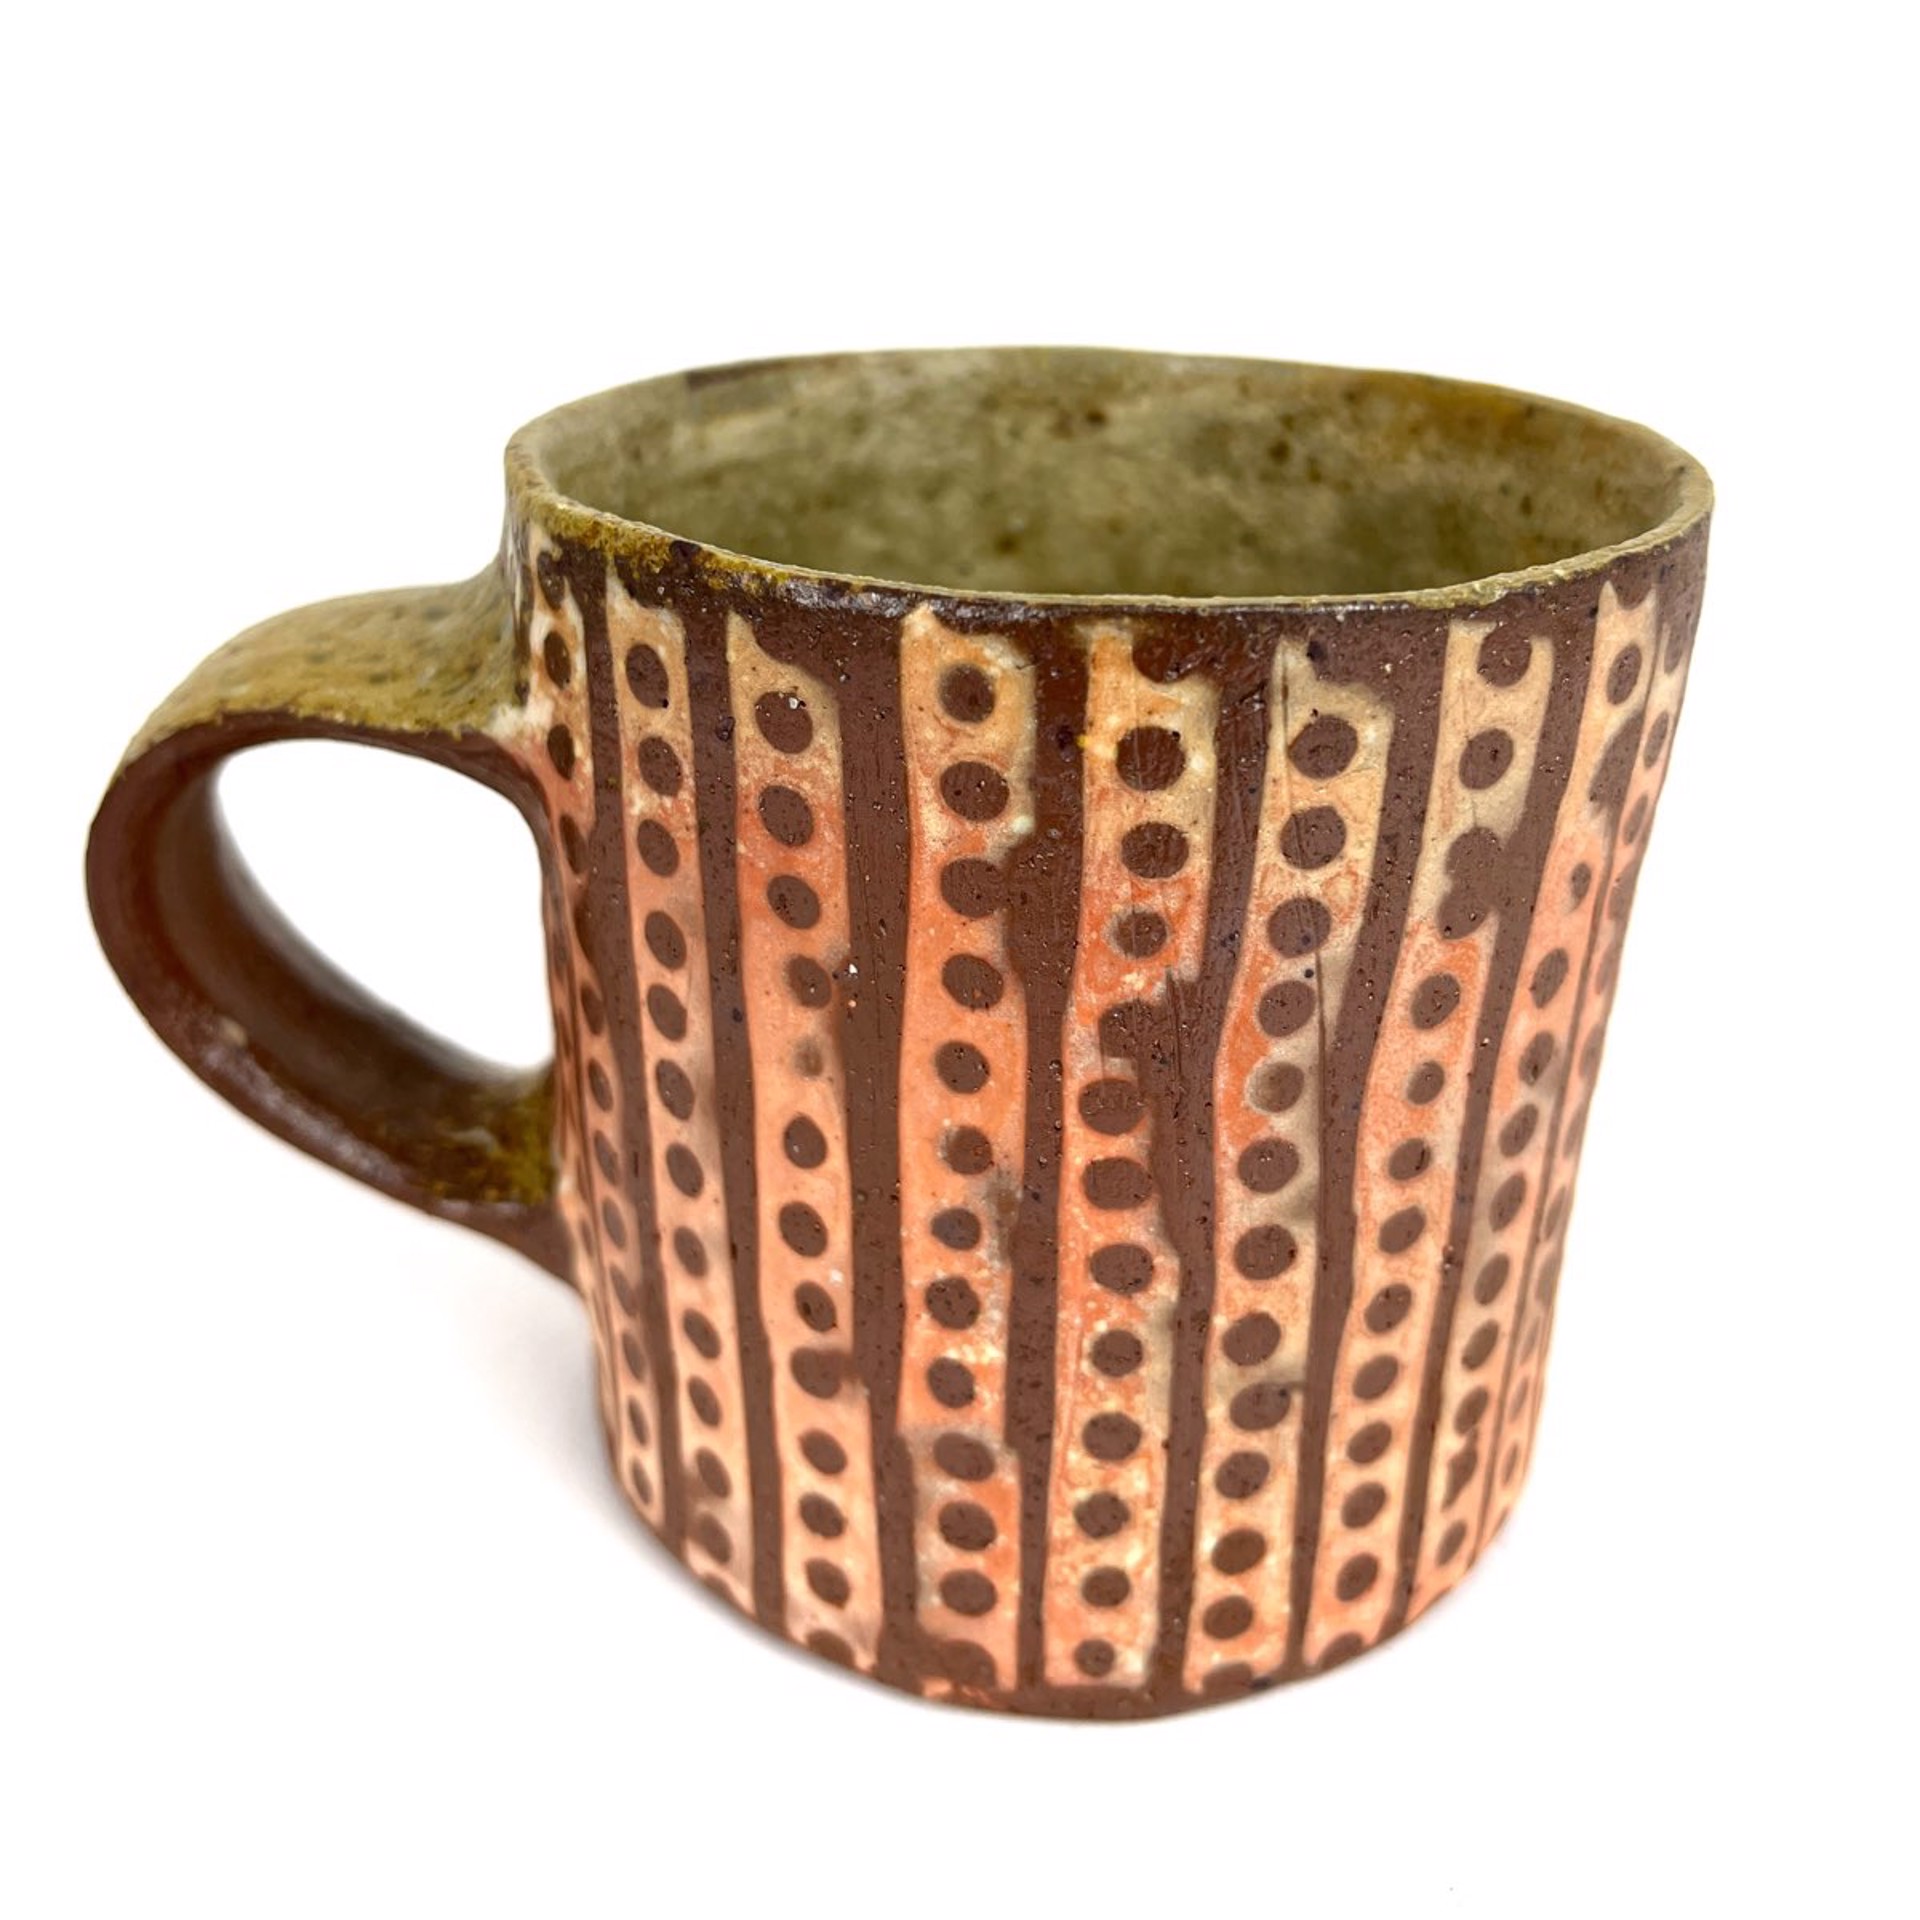 Wood-Fired Cup by Mitch Yung